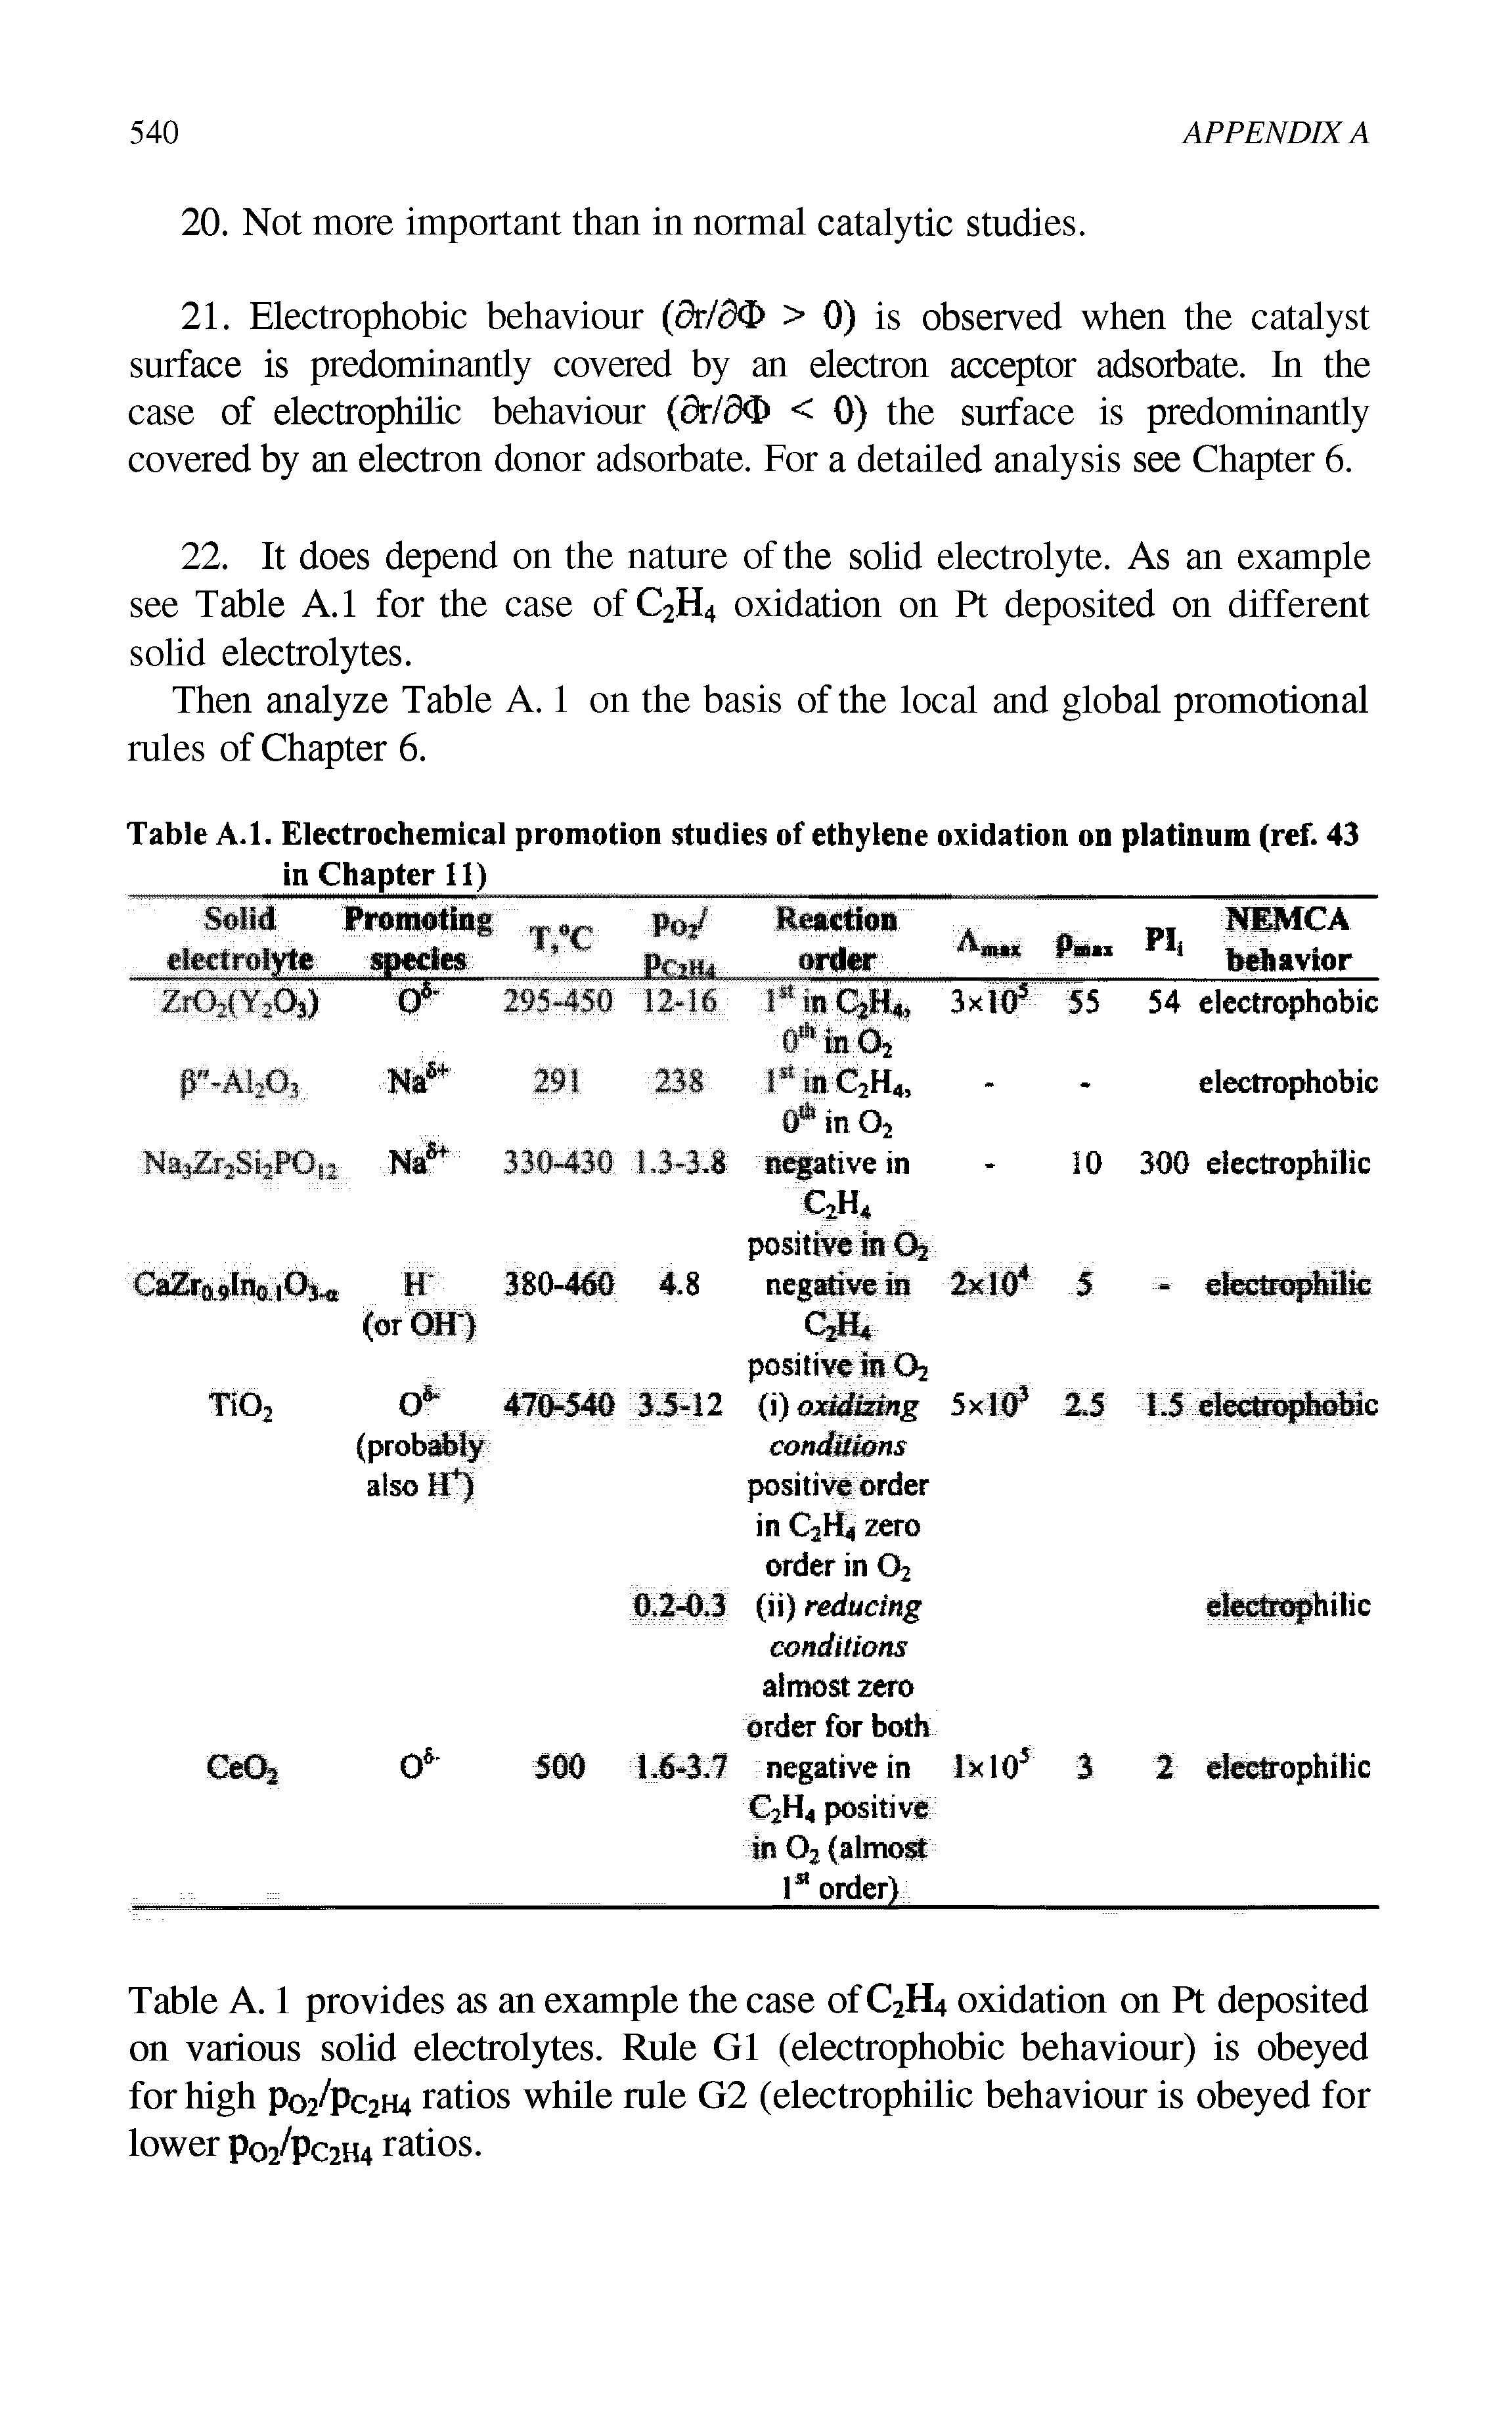 Table A. 1 provides as an example the case of C2H4 oxidation on Pt deposited on various solid electrolytes. Rule G1 (electrophobic behaviour) is obeyed for high P02/PC2H4 ratios while rule G2 (electrophilic behaviour is obeyed for lower po2/pC2H4 ratios.